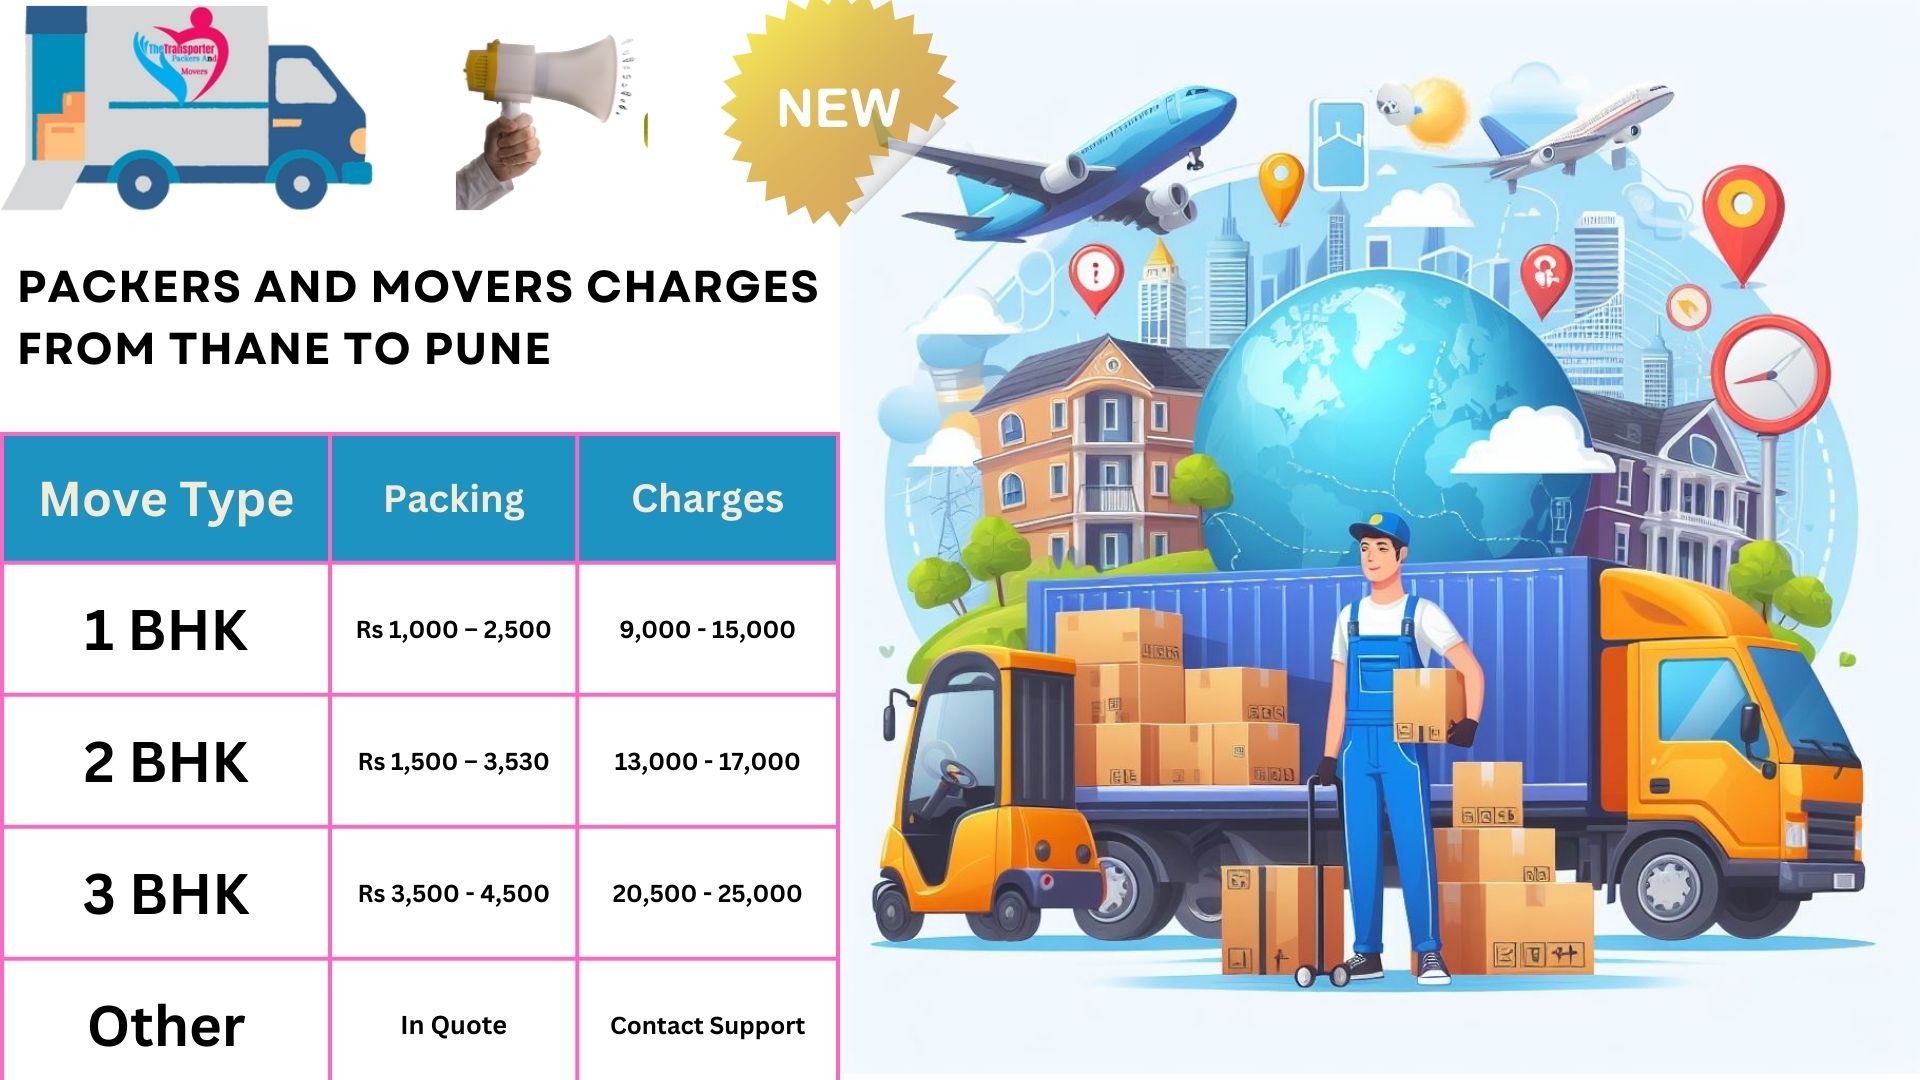 Packers and Movers charges list From Pune